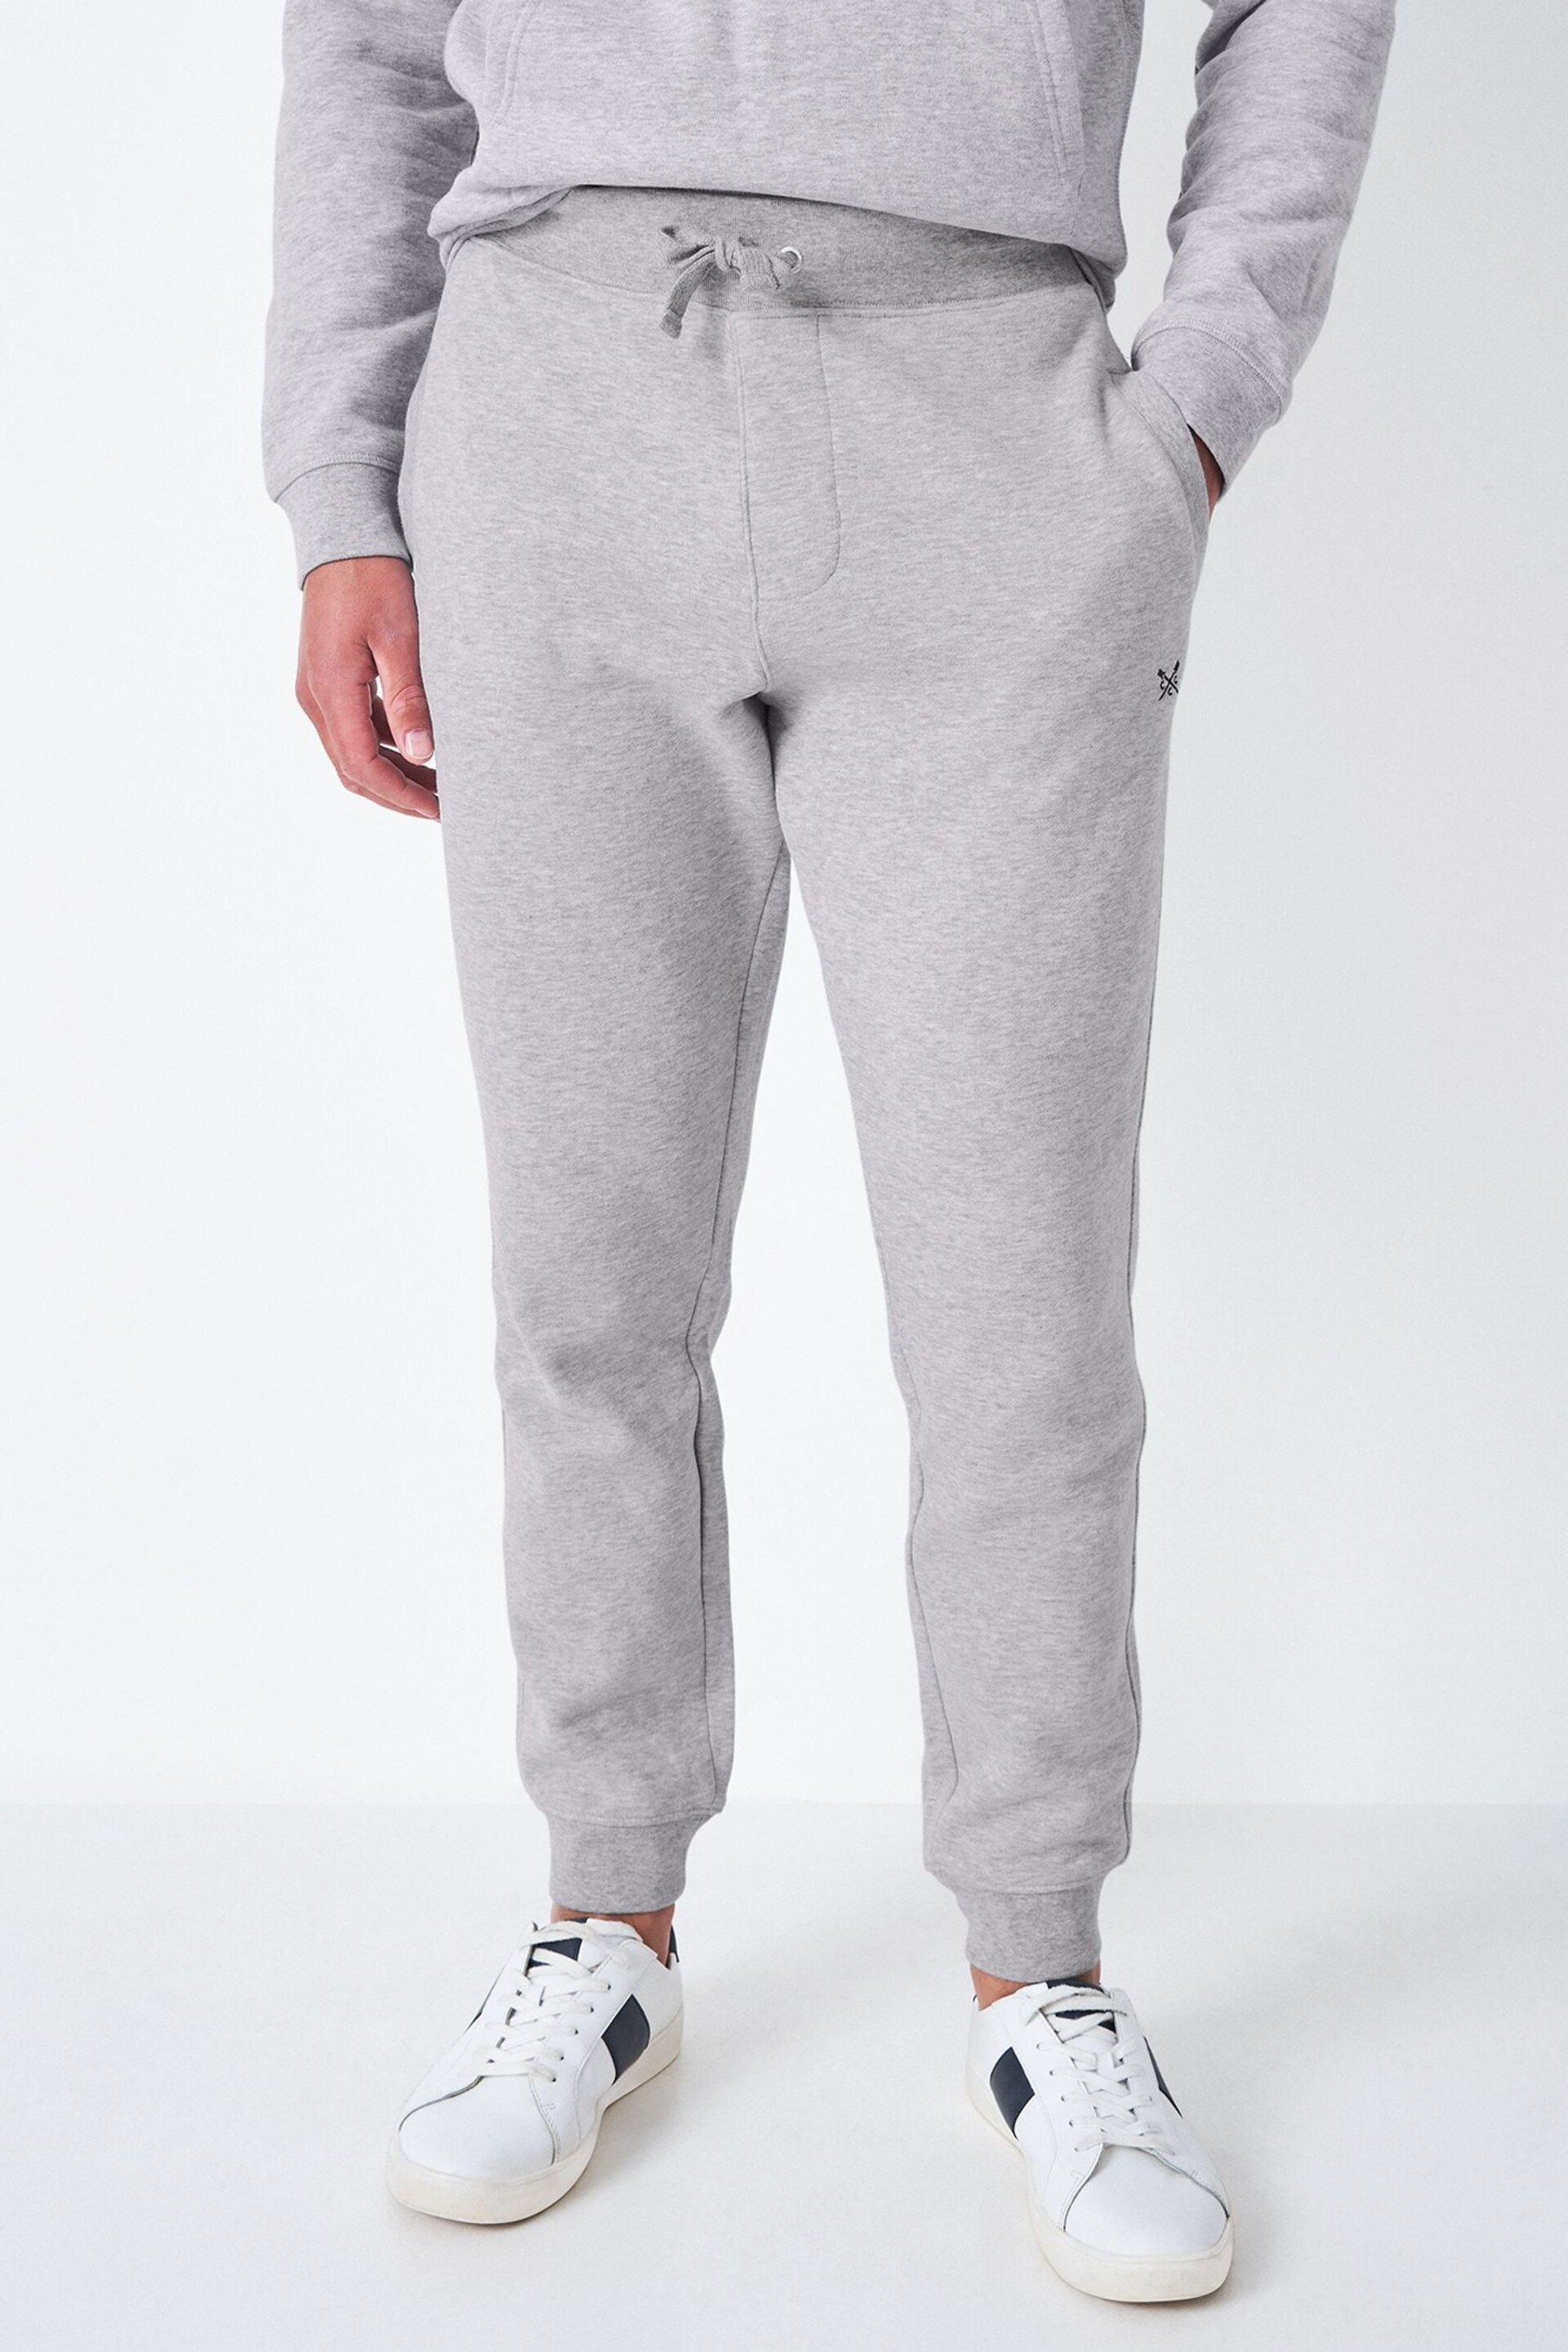 Crew Clothing Crossed Oars Joggers - Image 3 of 4